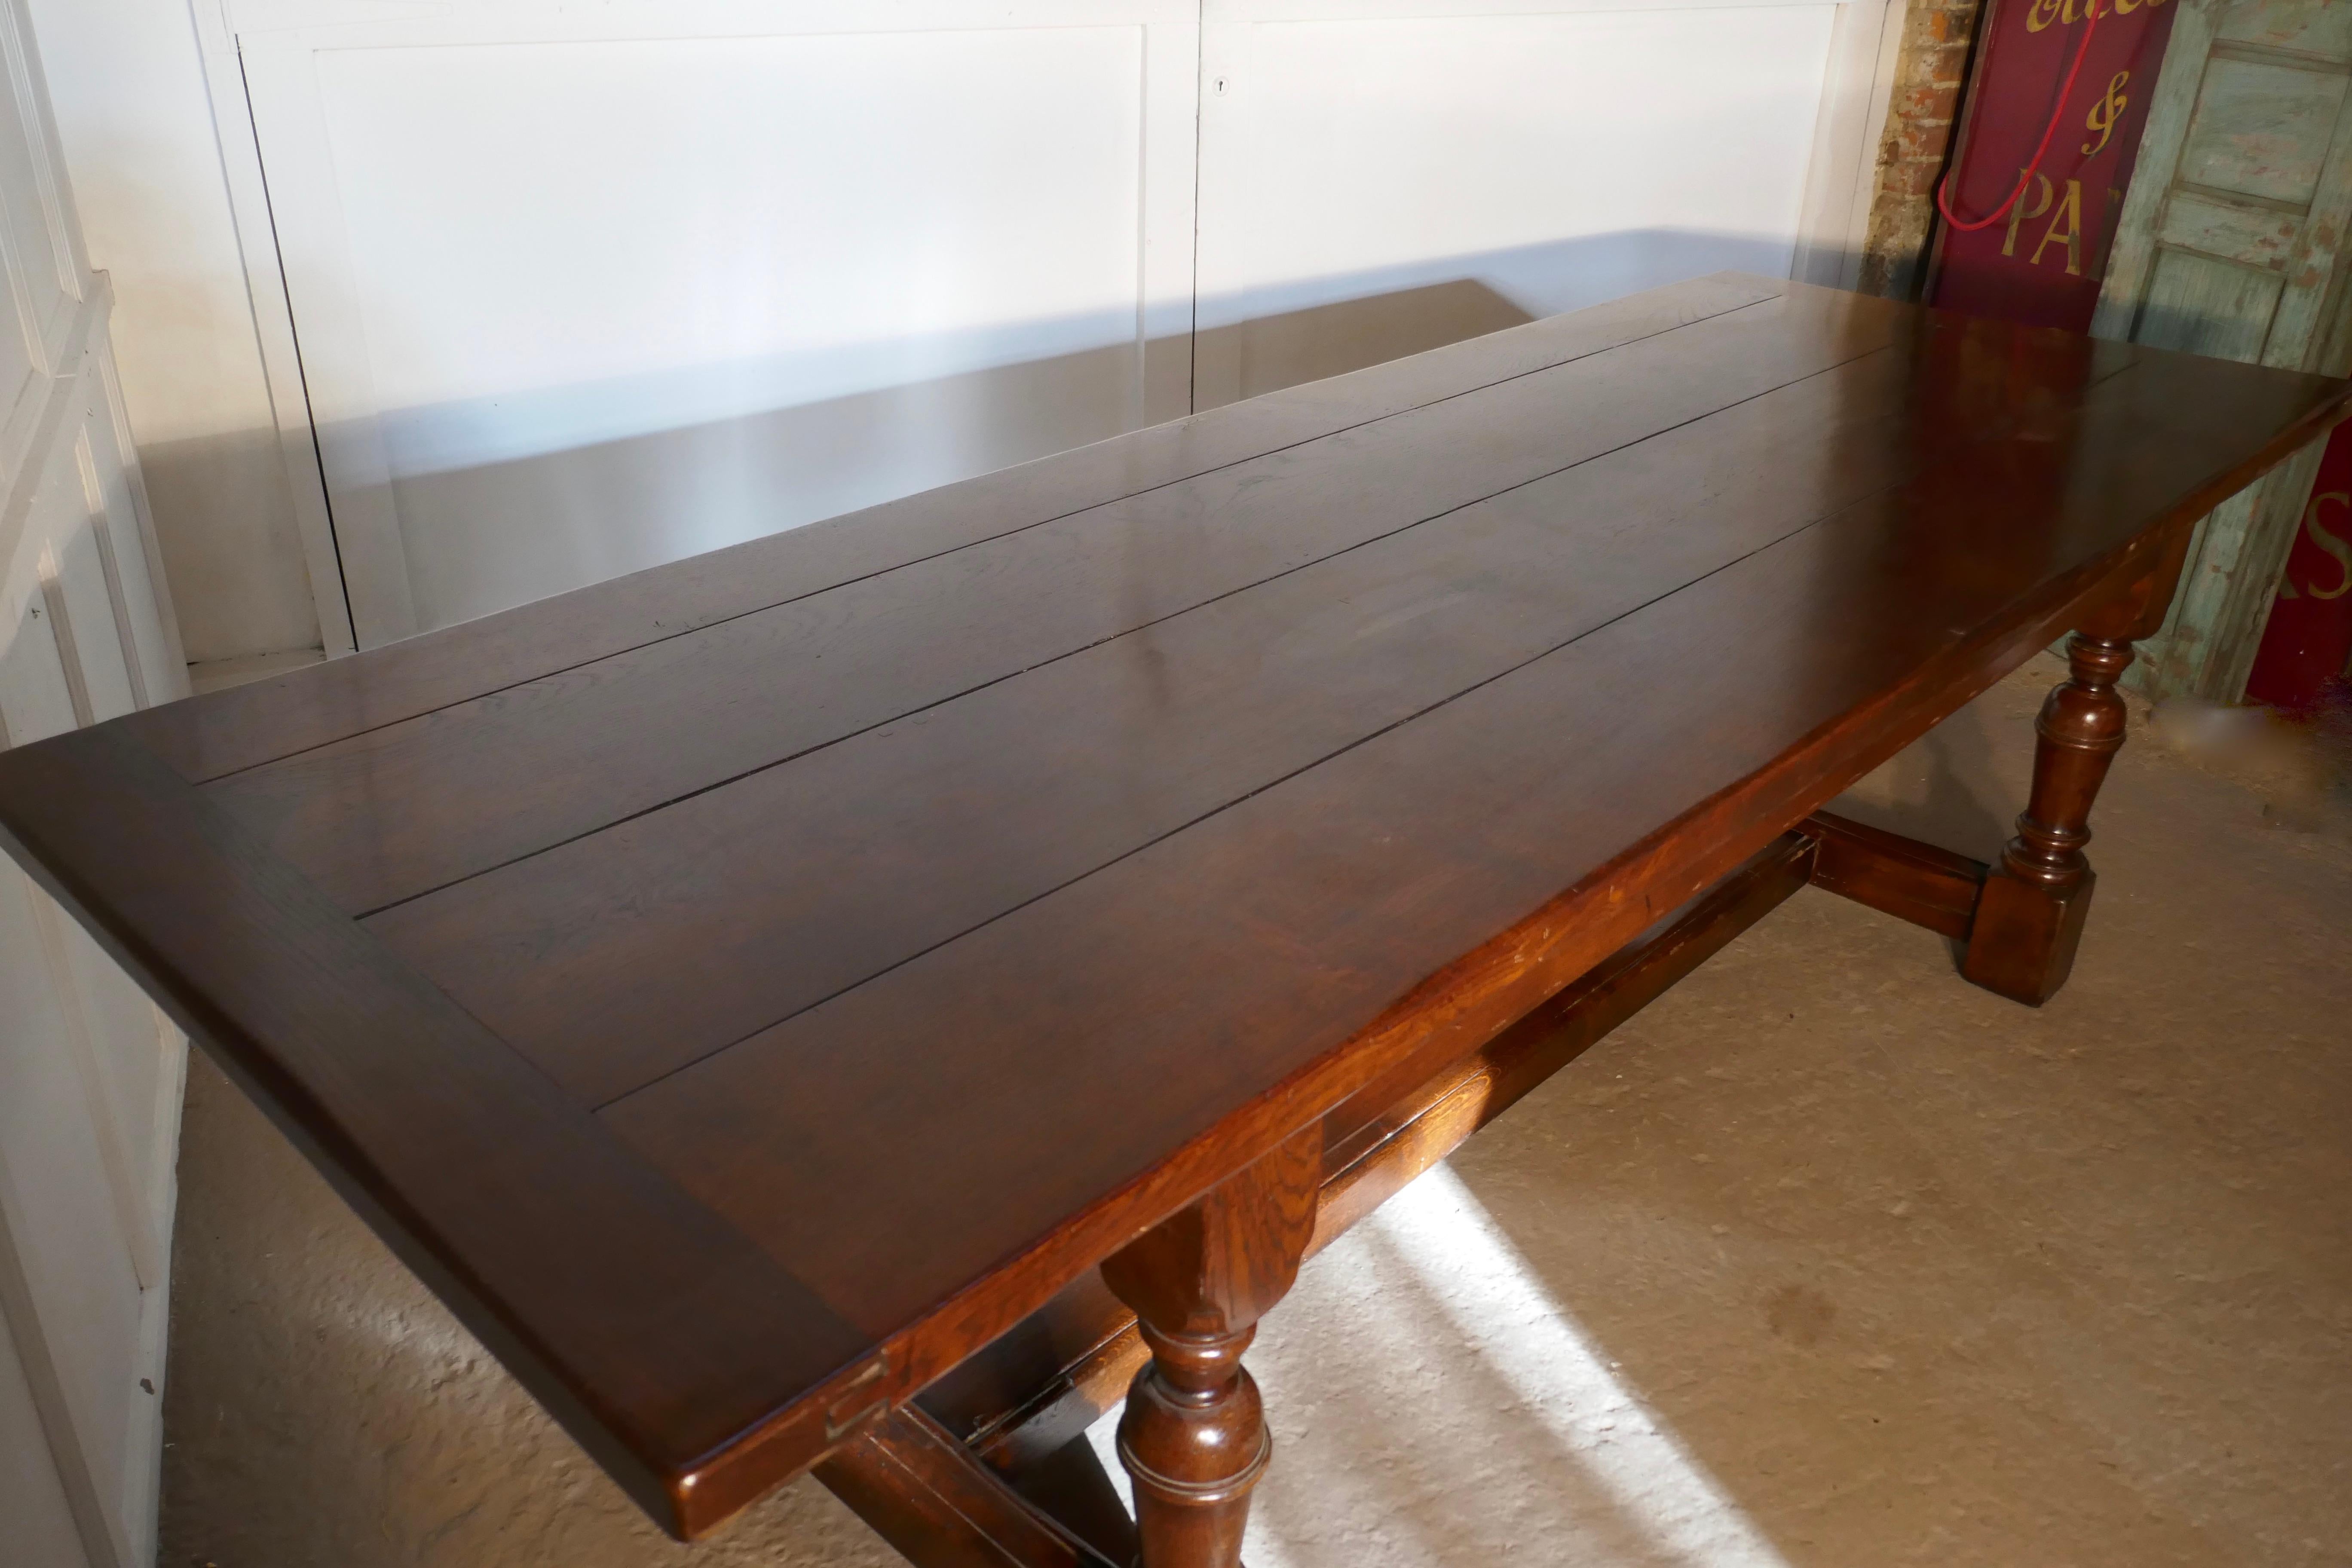 Superior quality oak refectory dining table

This is a very handsome table, it has a heavy solid 2” thick 4 plank top with cleated or breadboard ends it has very sturdy turned legs with a long wide H stretcher for even more added strength 

The